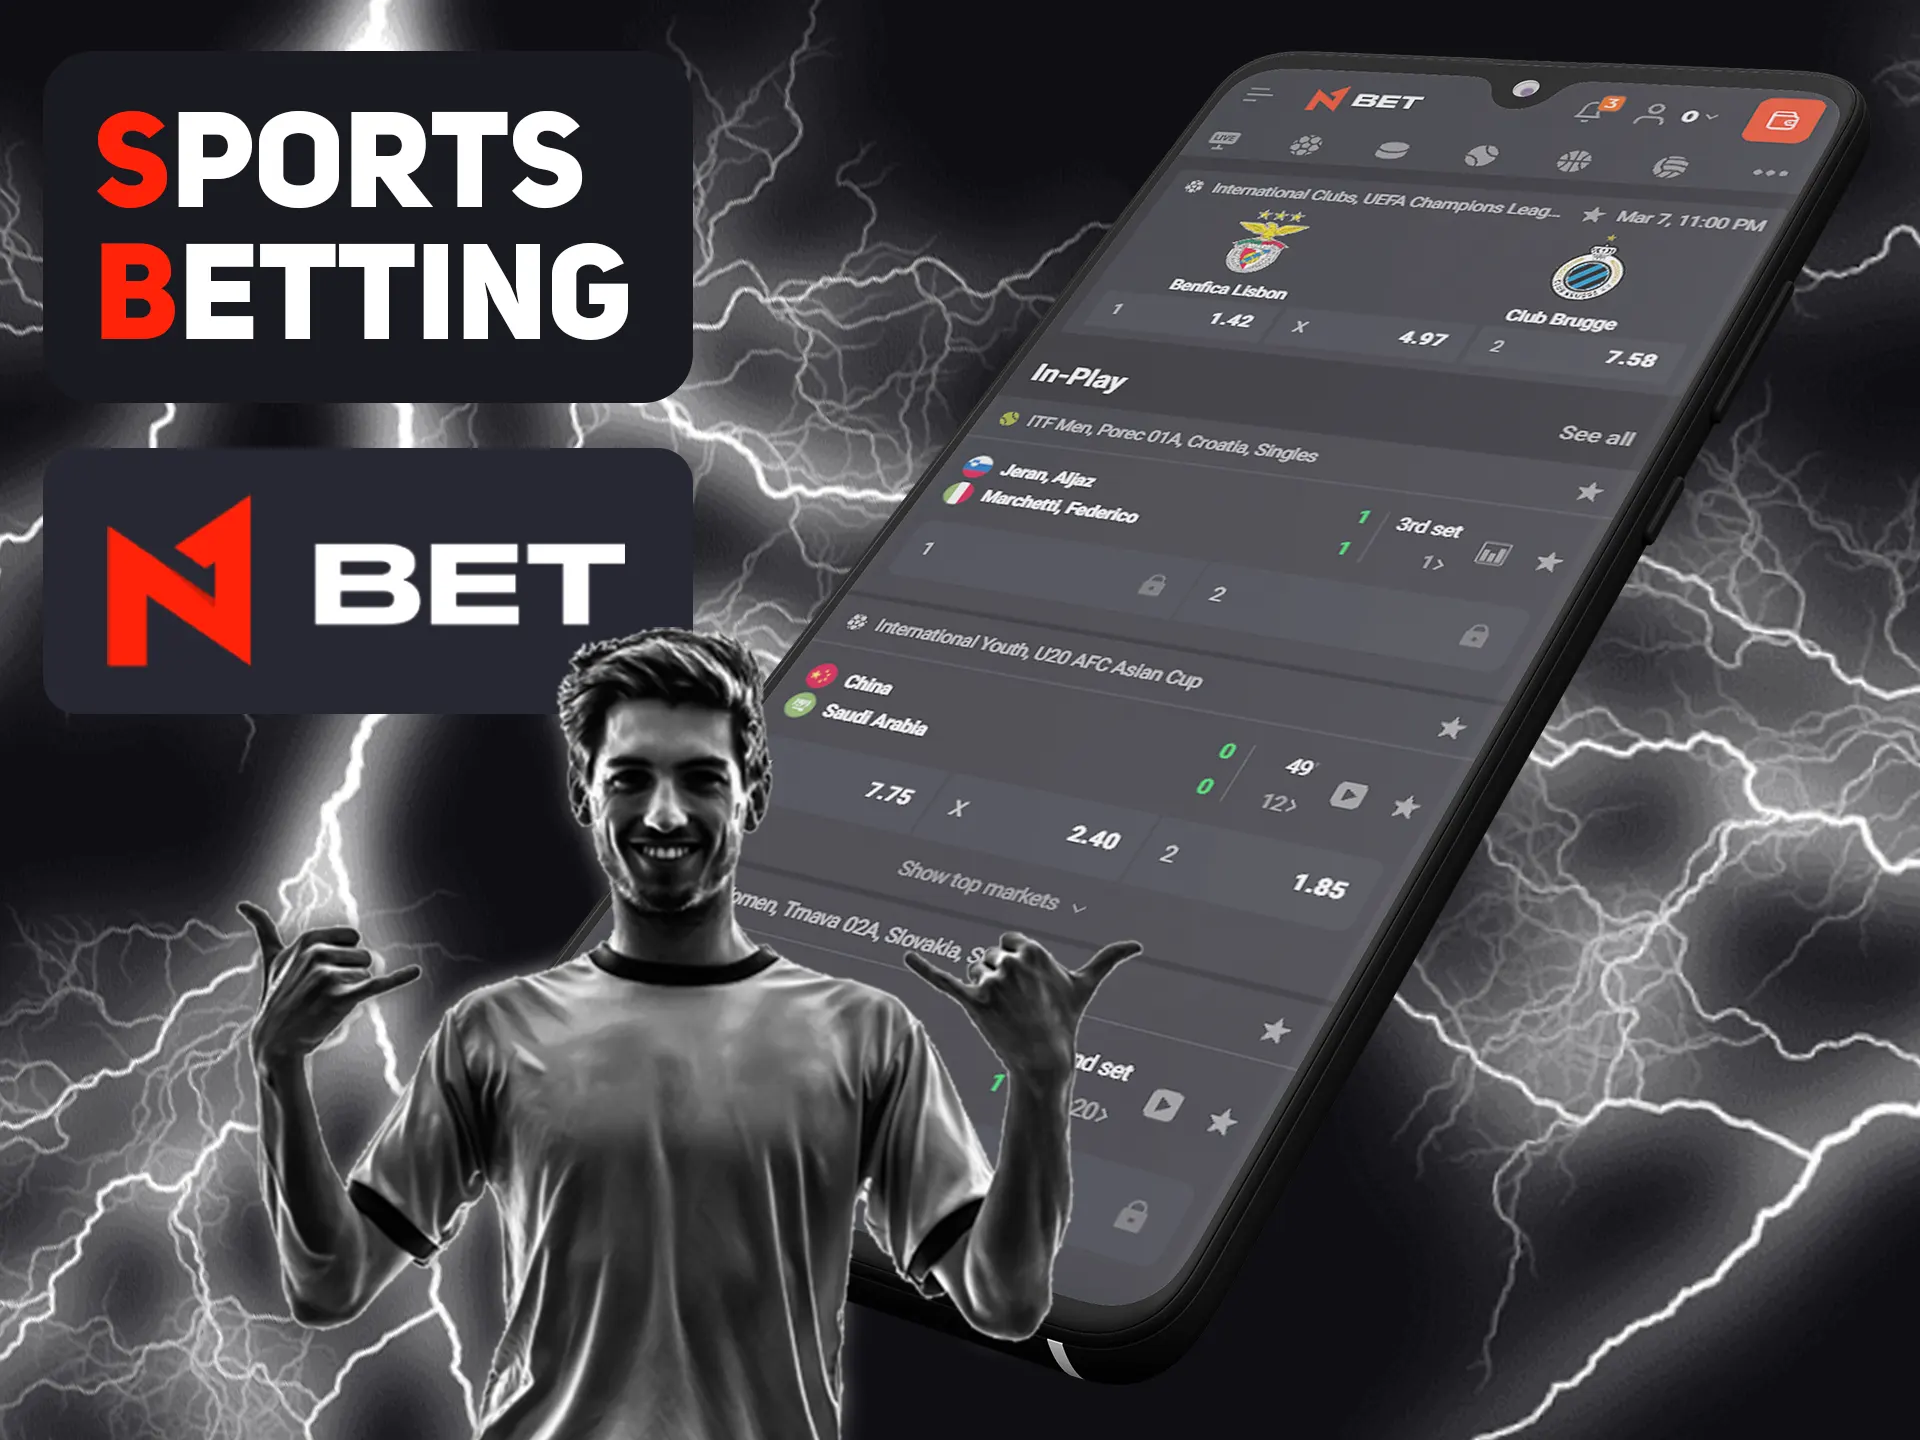 Bet on any type of sports in N1bet app.